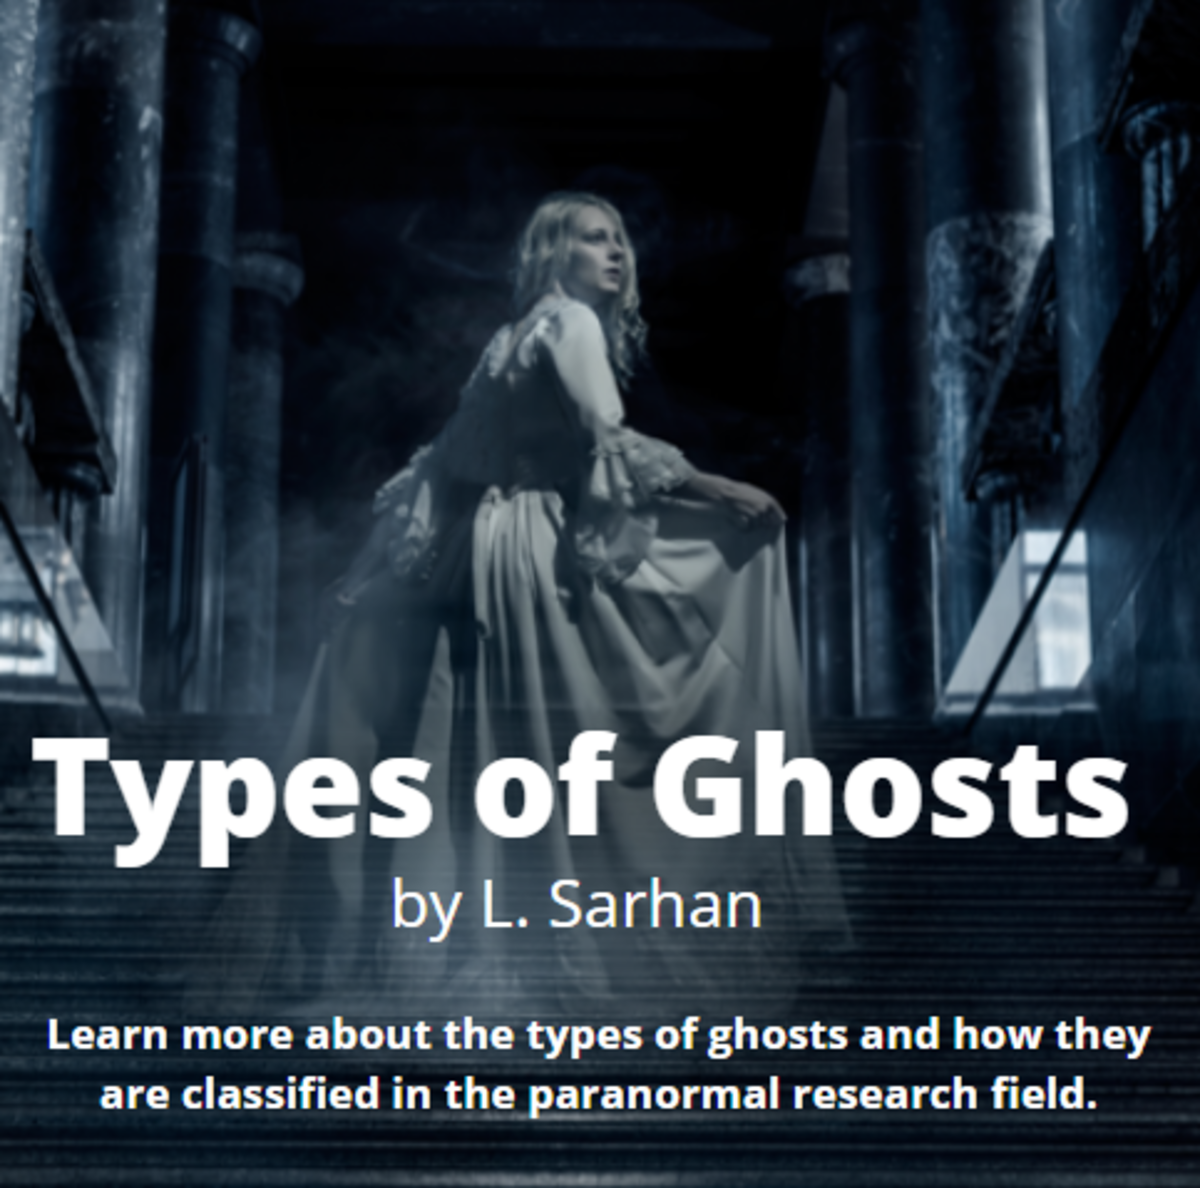 Learn more about the types of ghosts and how they are classified in the paranormal research field.